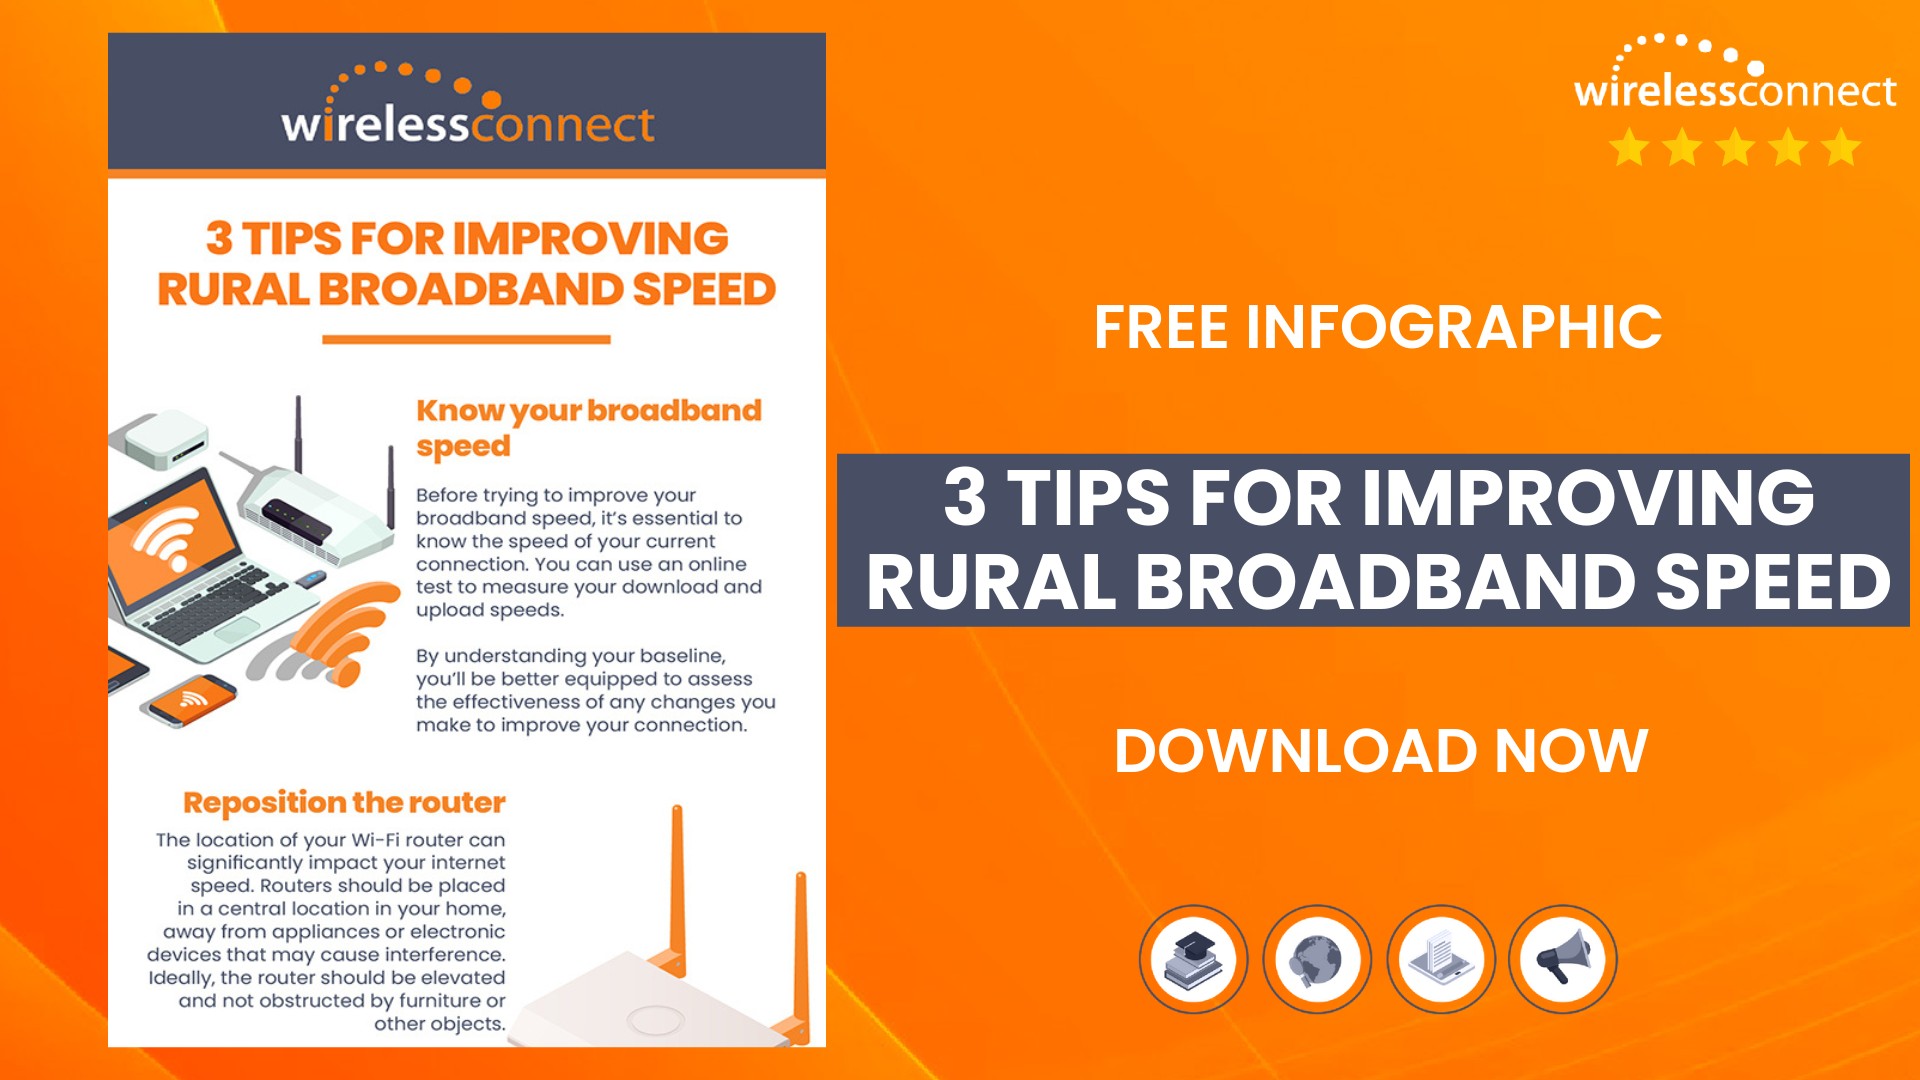 3 Tips For Improving Rural Broadband Speed - Infographic - SM - Wireless Connect